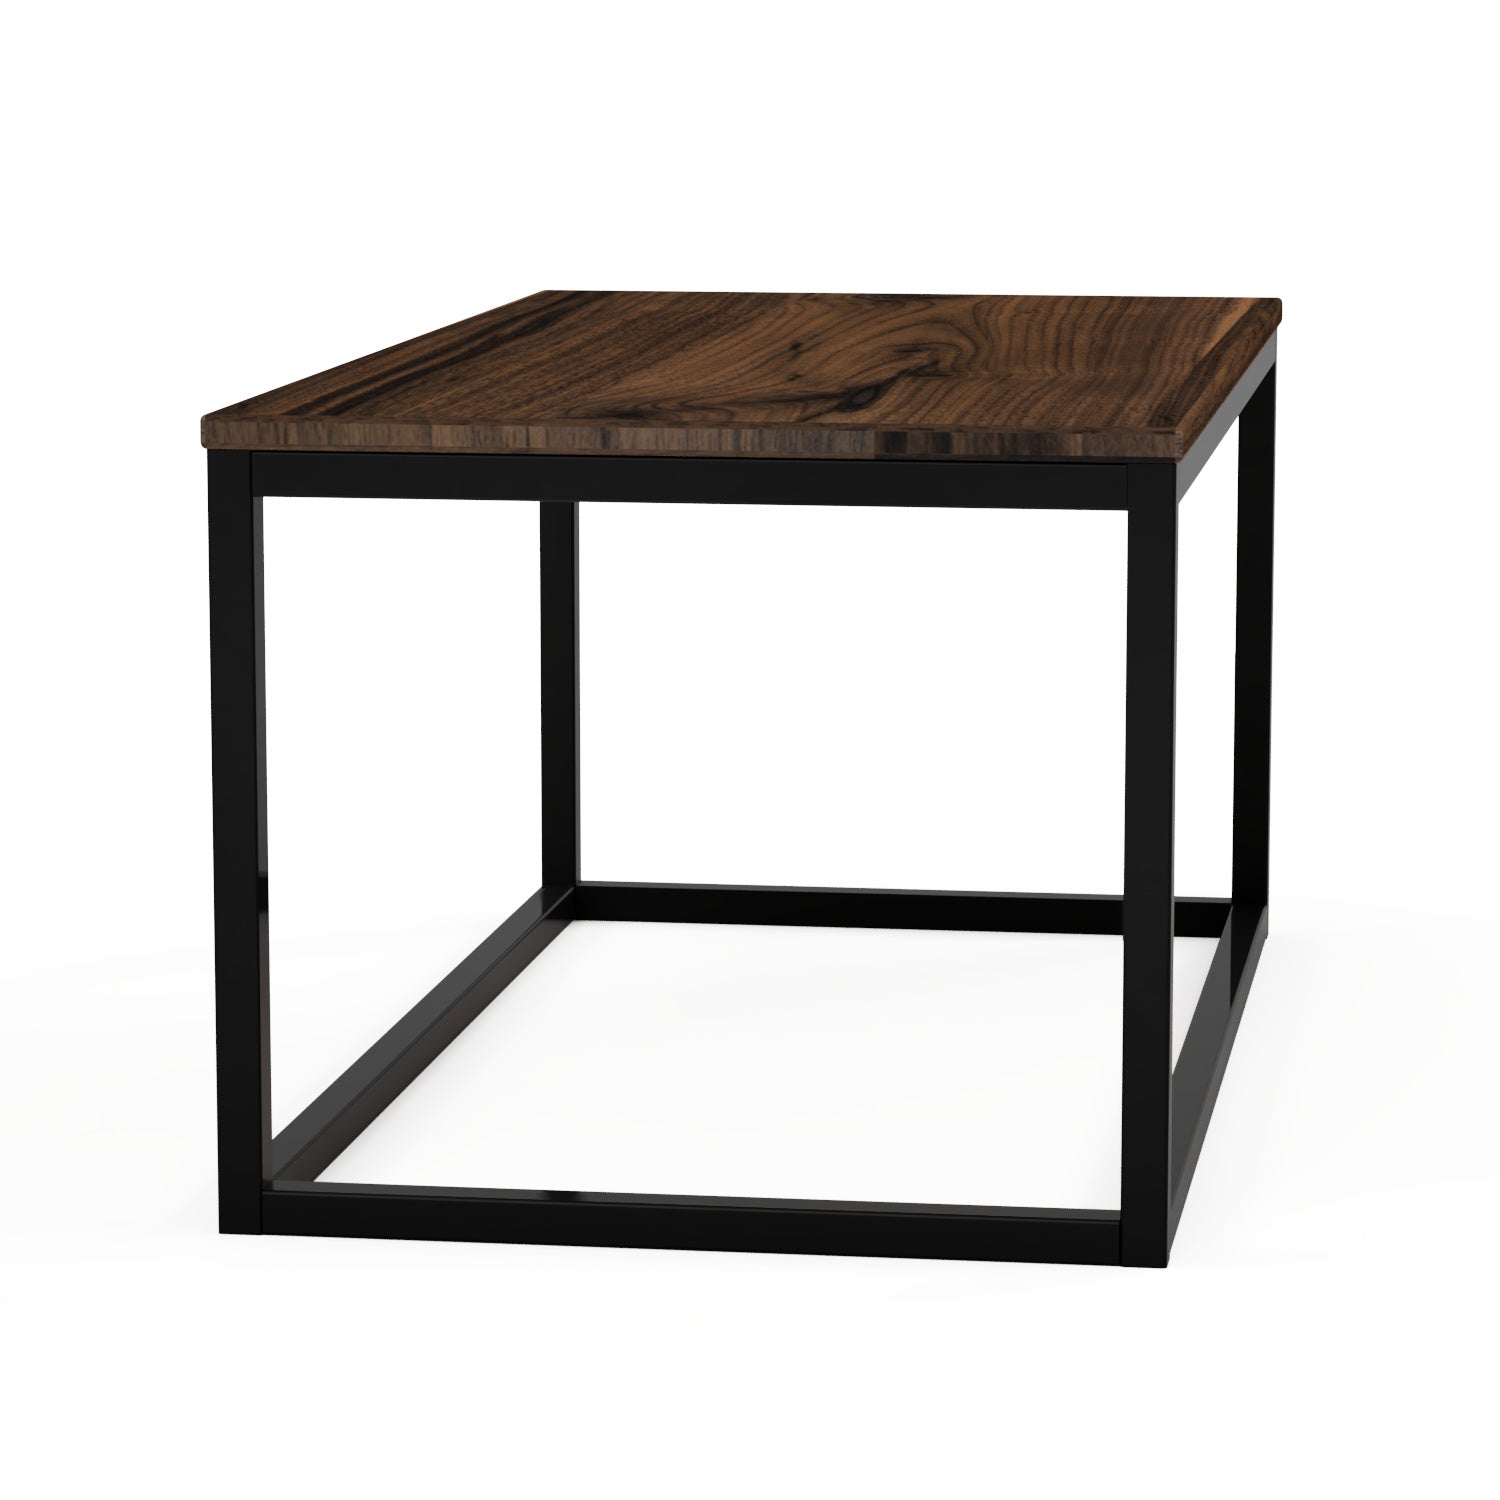 The Sedona Coffee Table - FargoWoodworks